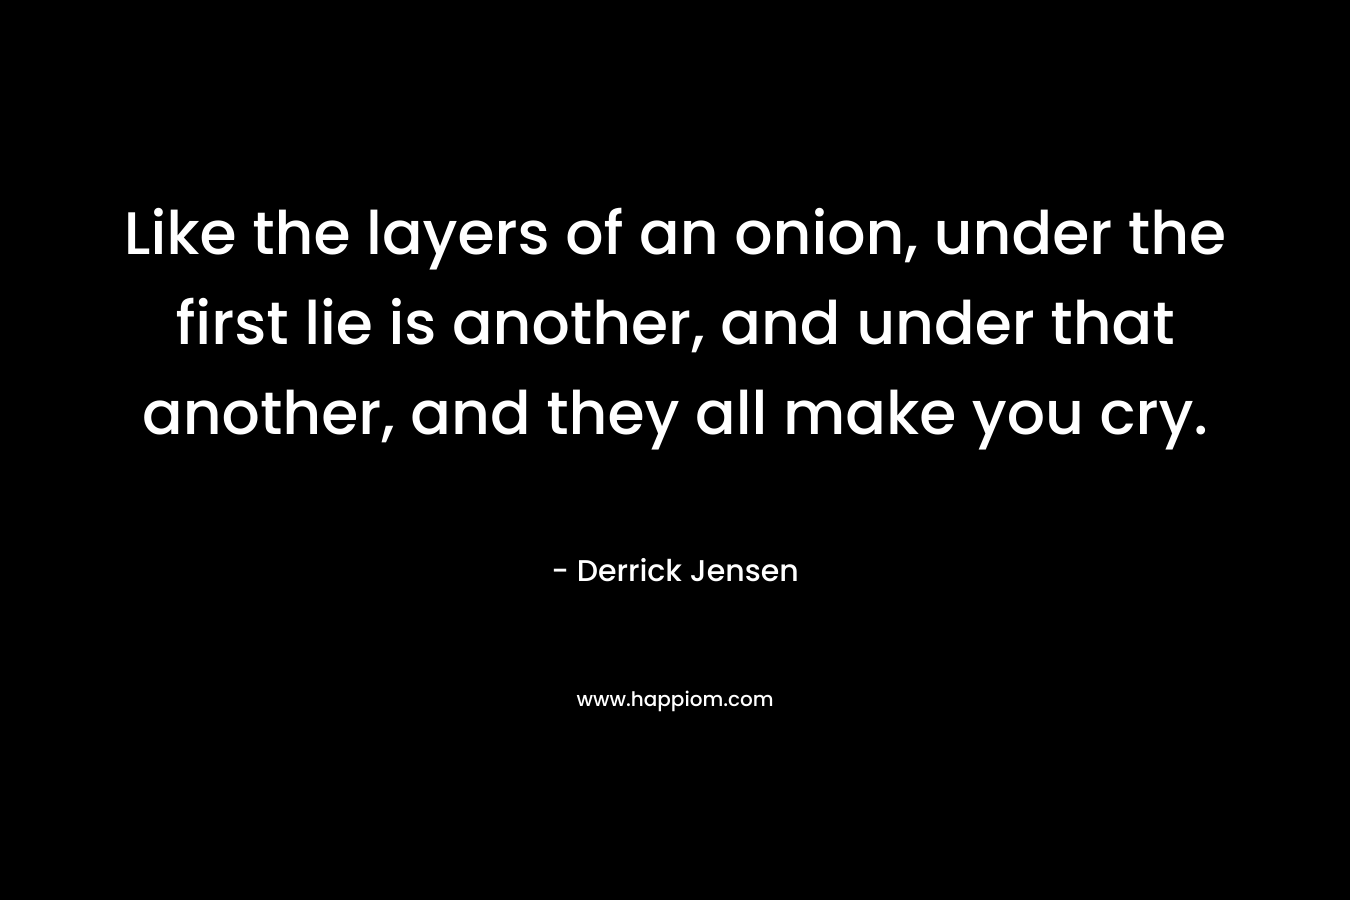 Like the layers of an onion, under the first lie is another, and under that another, and they all make you cry. – Derrick Jensen